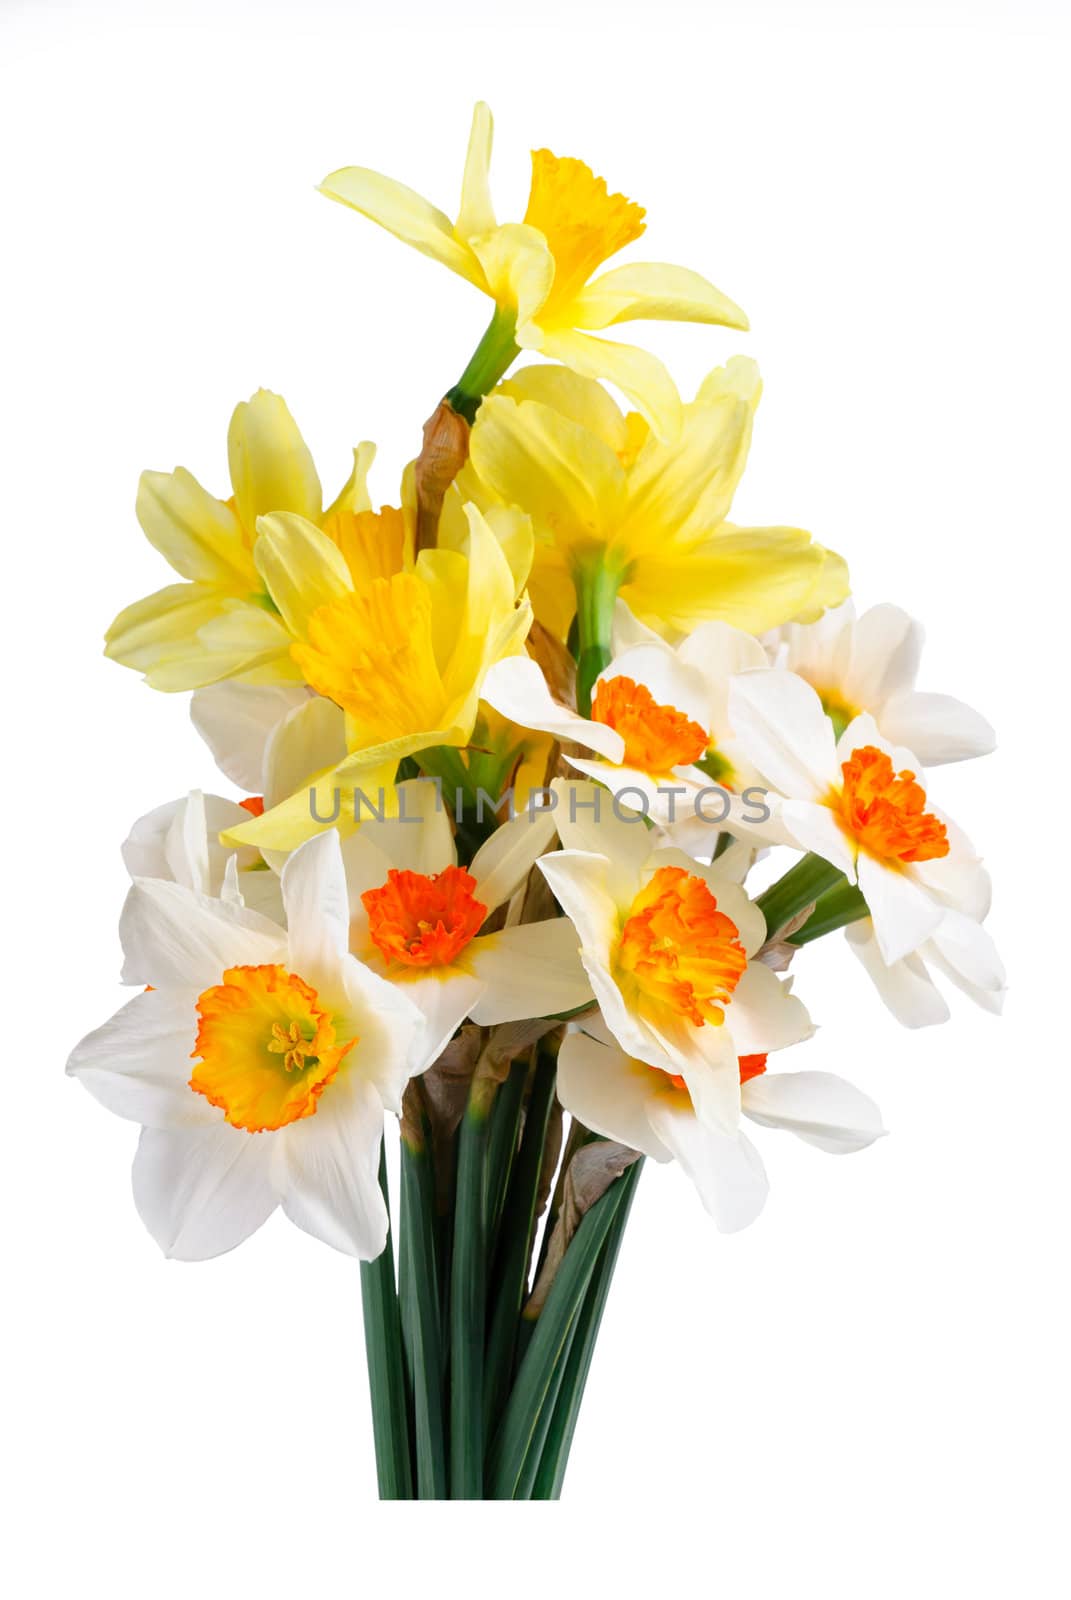 Bouquet of yellow and white narcissus by firewings